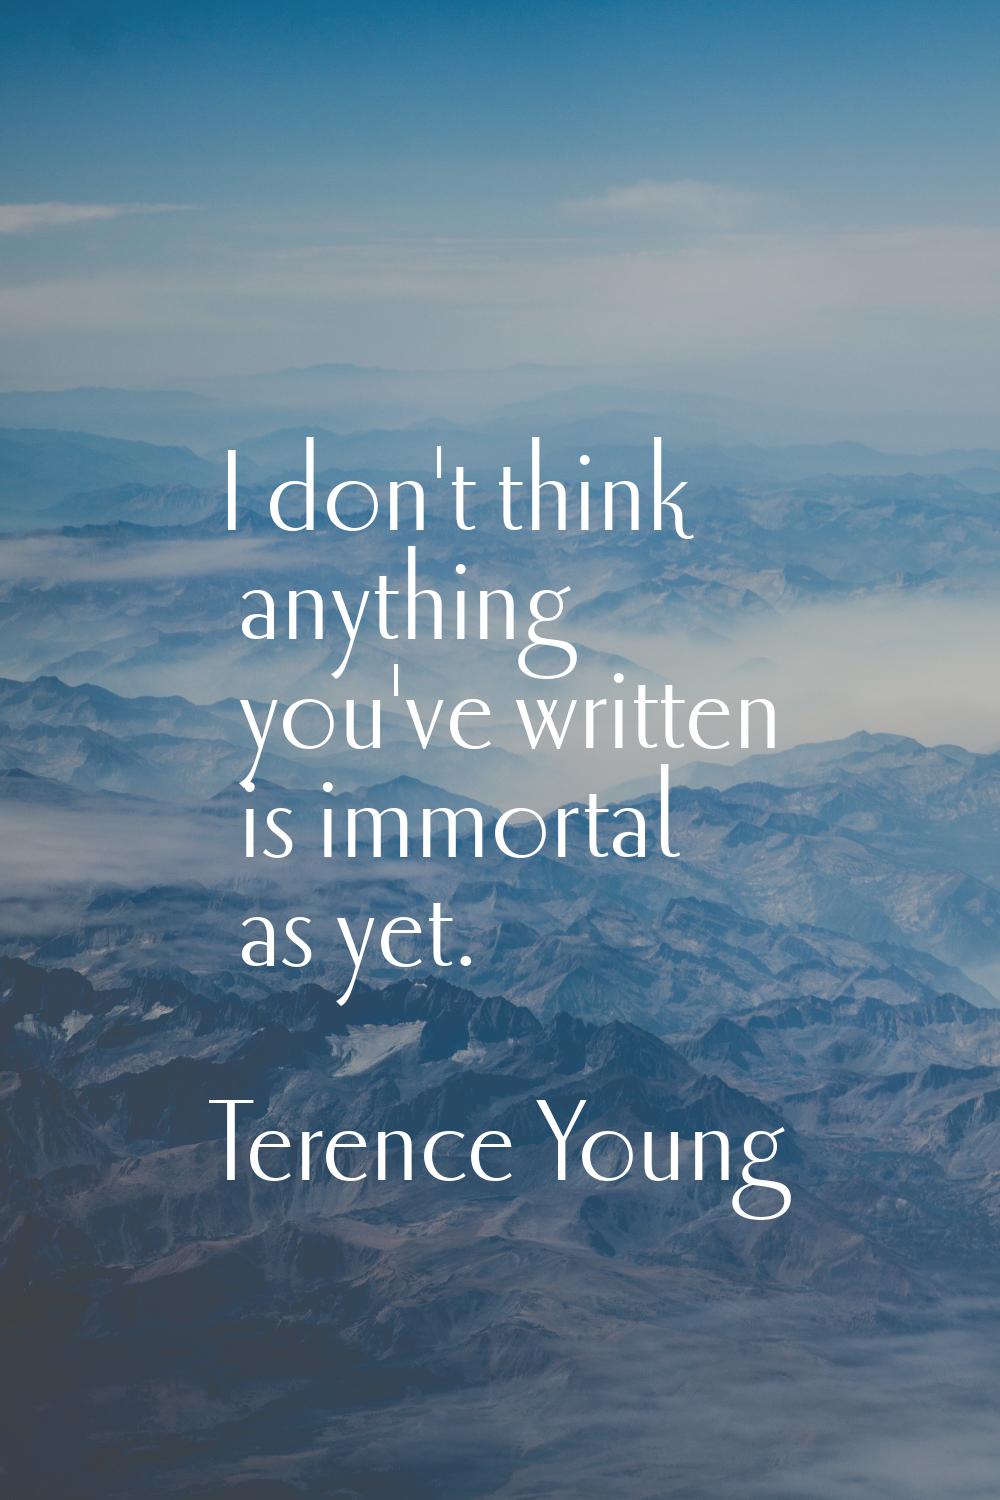 I don't think anything you've written is immortal as yet.